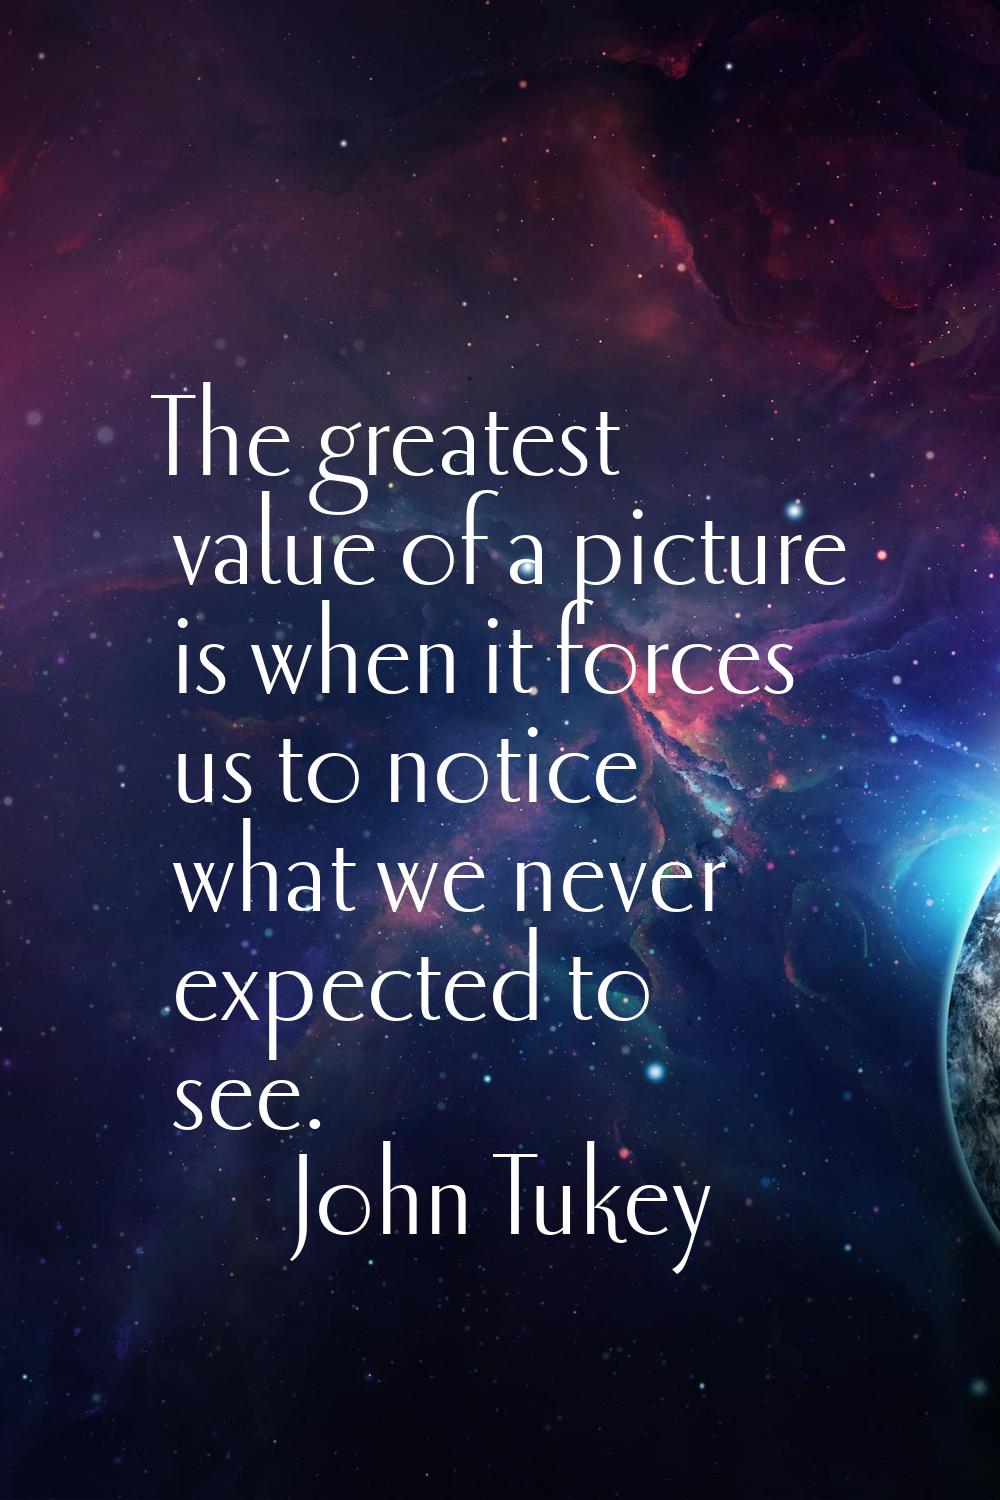 The greatest value of a picture is when it forces us to notice what we never expected to see.